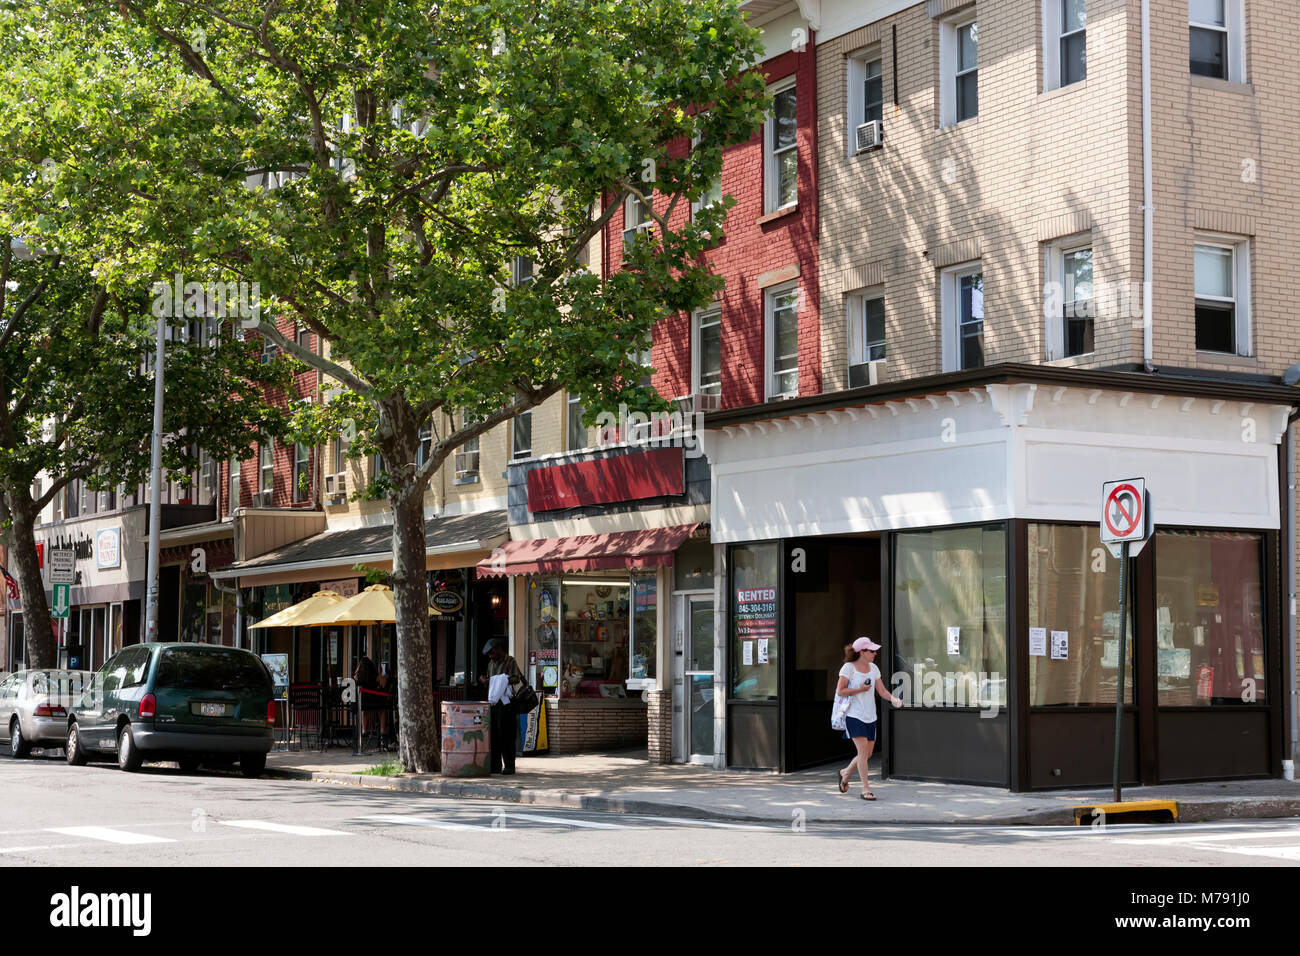 Downtown Main Street in the village of Nyack in Rockland County, New York, USA. Stock Photo